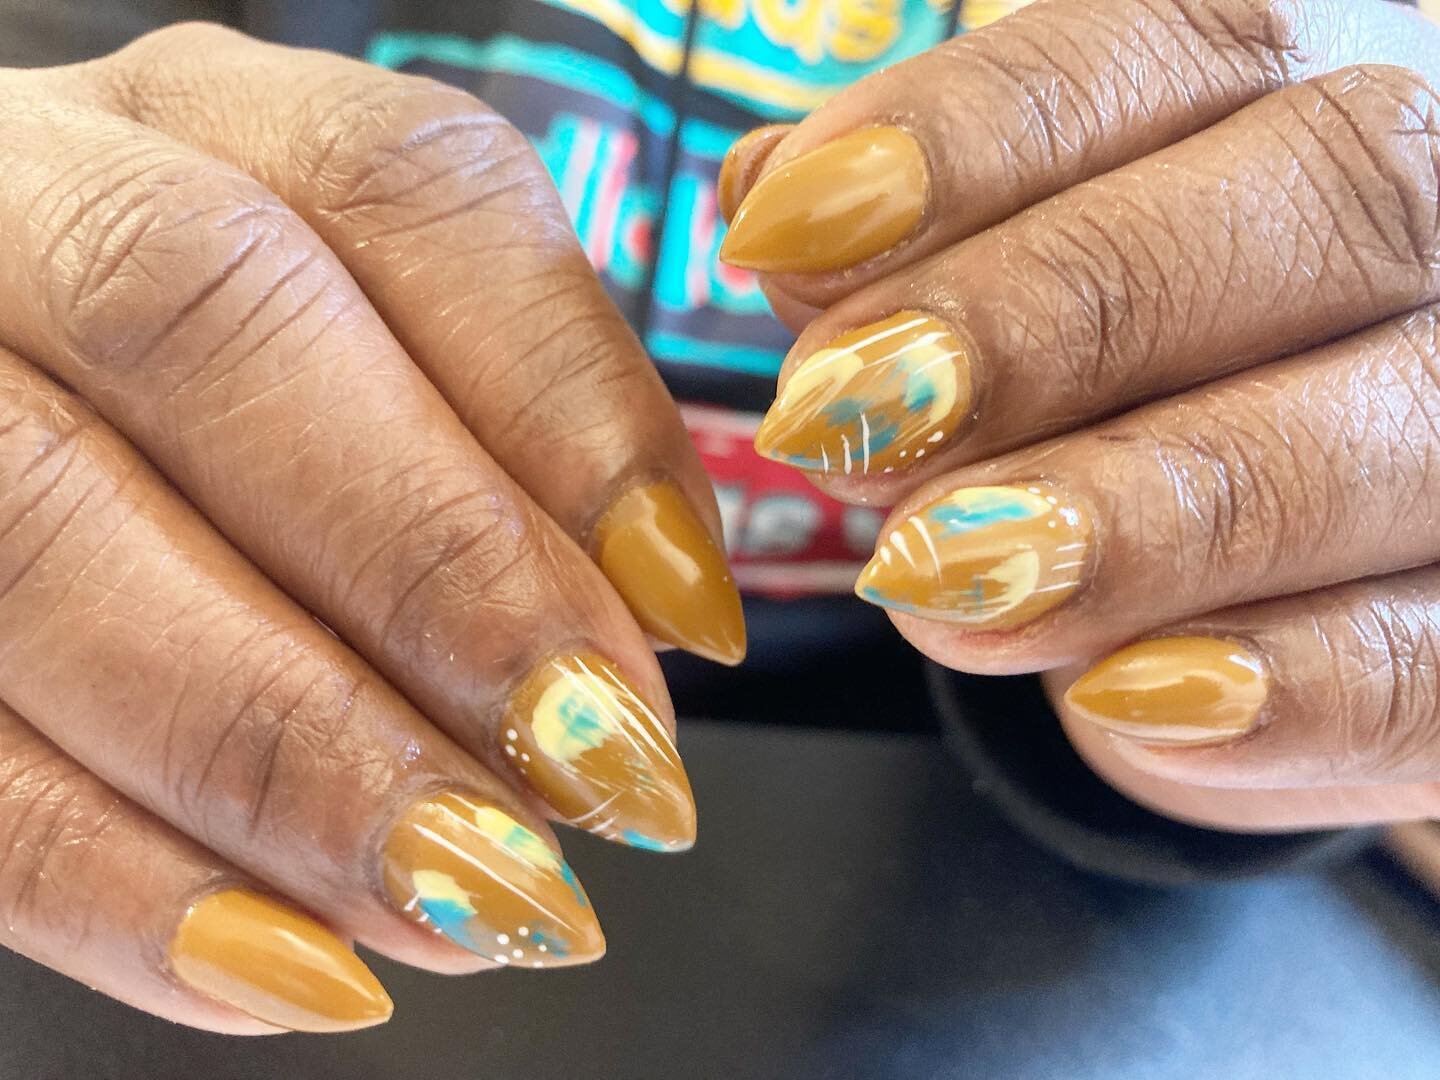 Polygel overlay. 

You ever realize when you&rsquo;ve subconsciously been inspired by colors around you? 
That&rsquo;s what happened here. 
I noticed the colors on her sweater when I took the pic. 💛💚🧡

#polygel #shortnails #nails #naturalnails #na